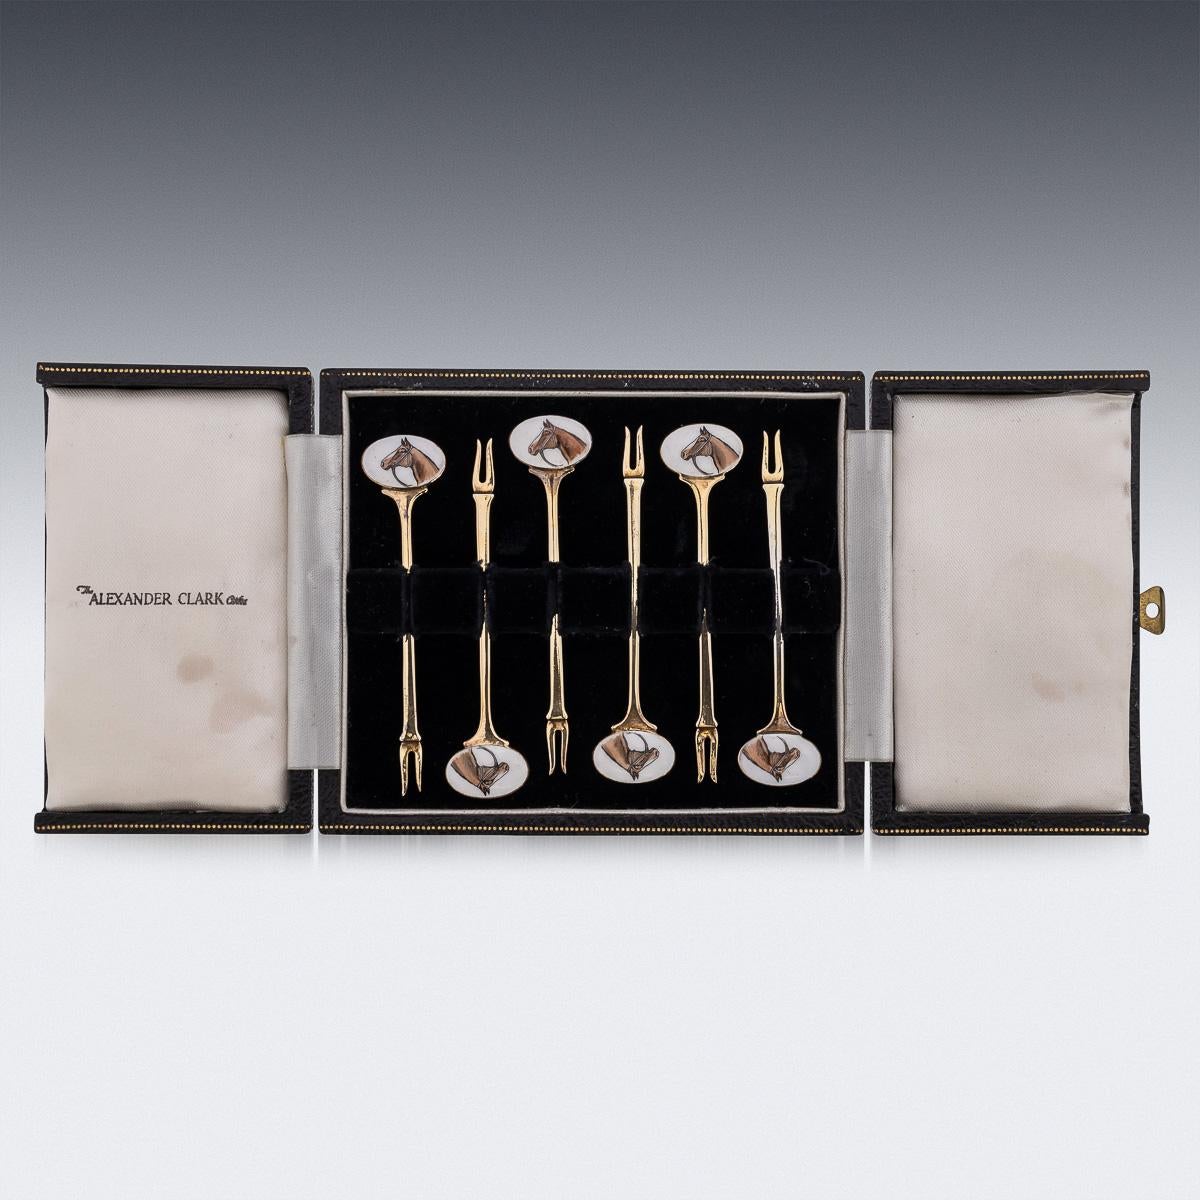 Mid 20th Century British solid silver-gilt set of six cocktail picks, decorated with enamels depicting race horses. The set comes in its original leatherette and velvet lined box. Each piece is Hallmarked English silver (925 Standard), Birmingham,